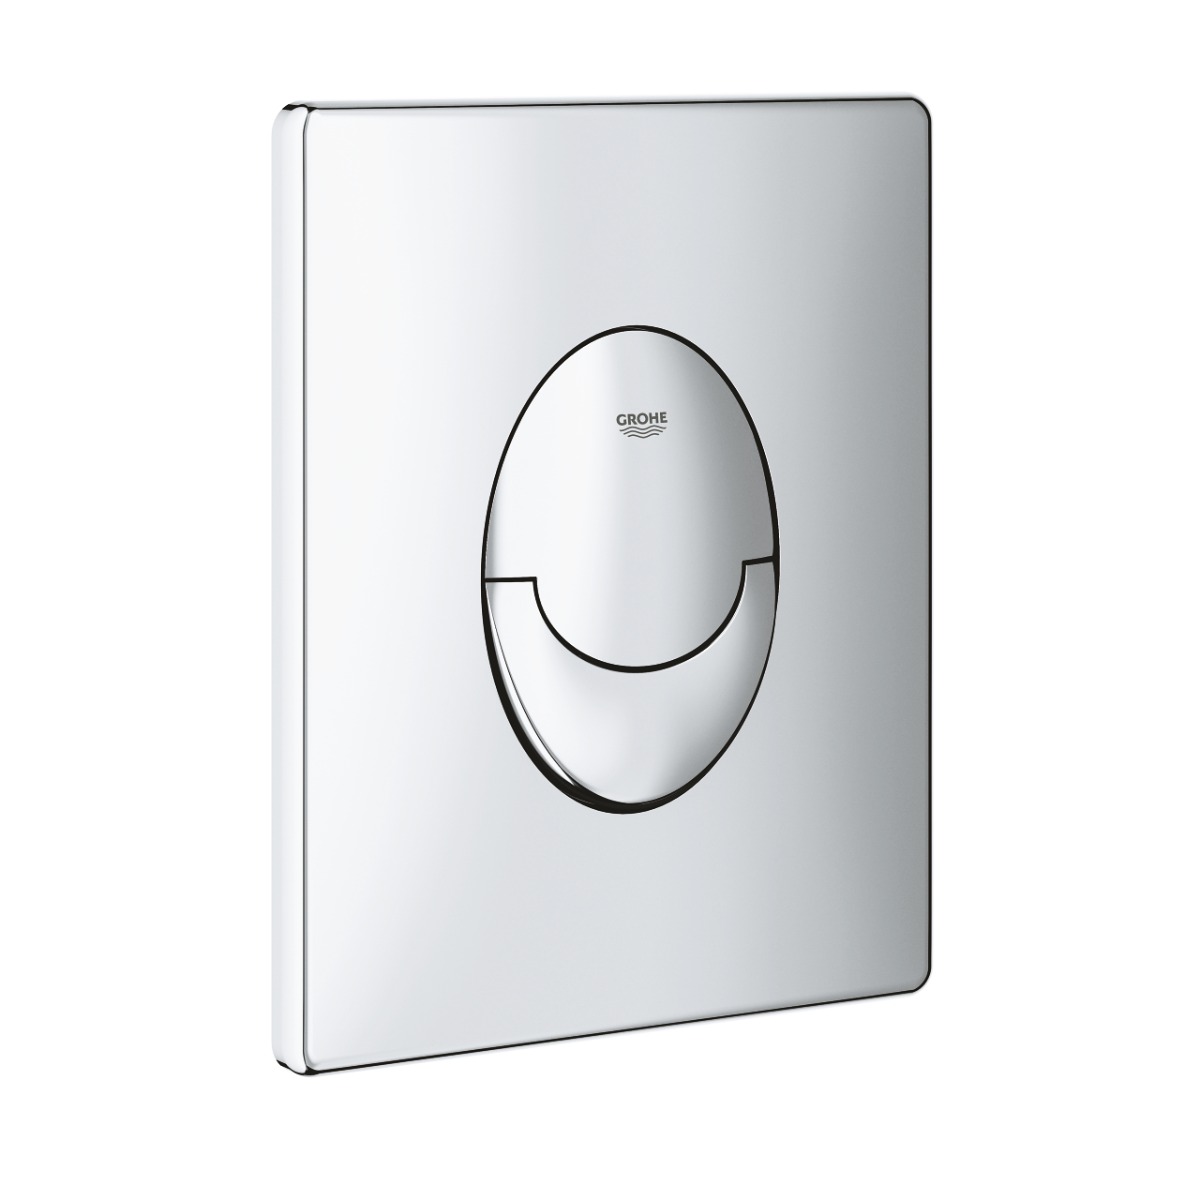 Placa actionare wc Grohe Skate Air-38505000 baterii-lux.ro/